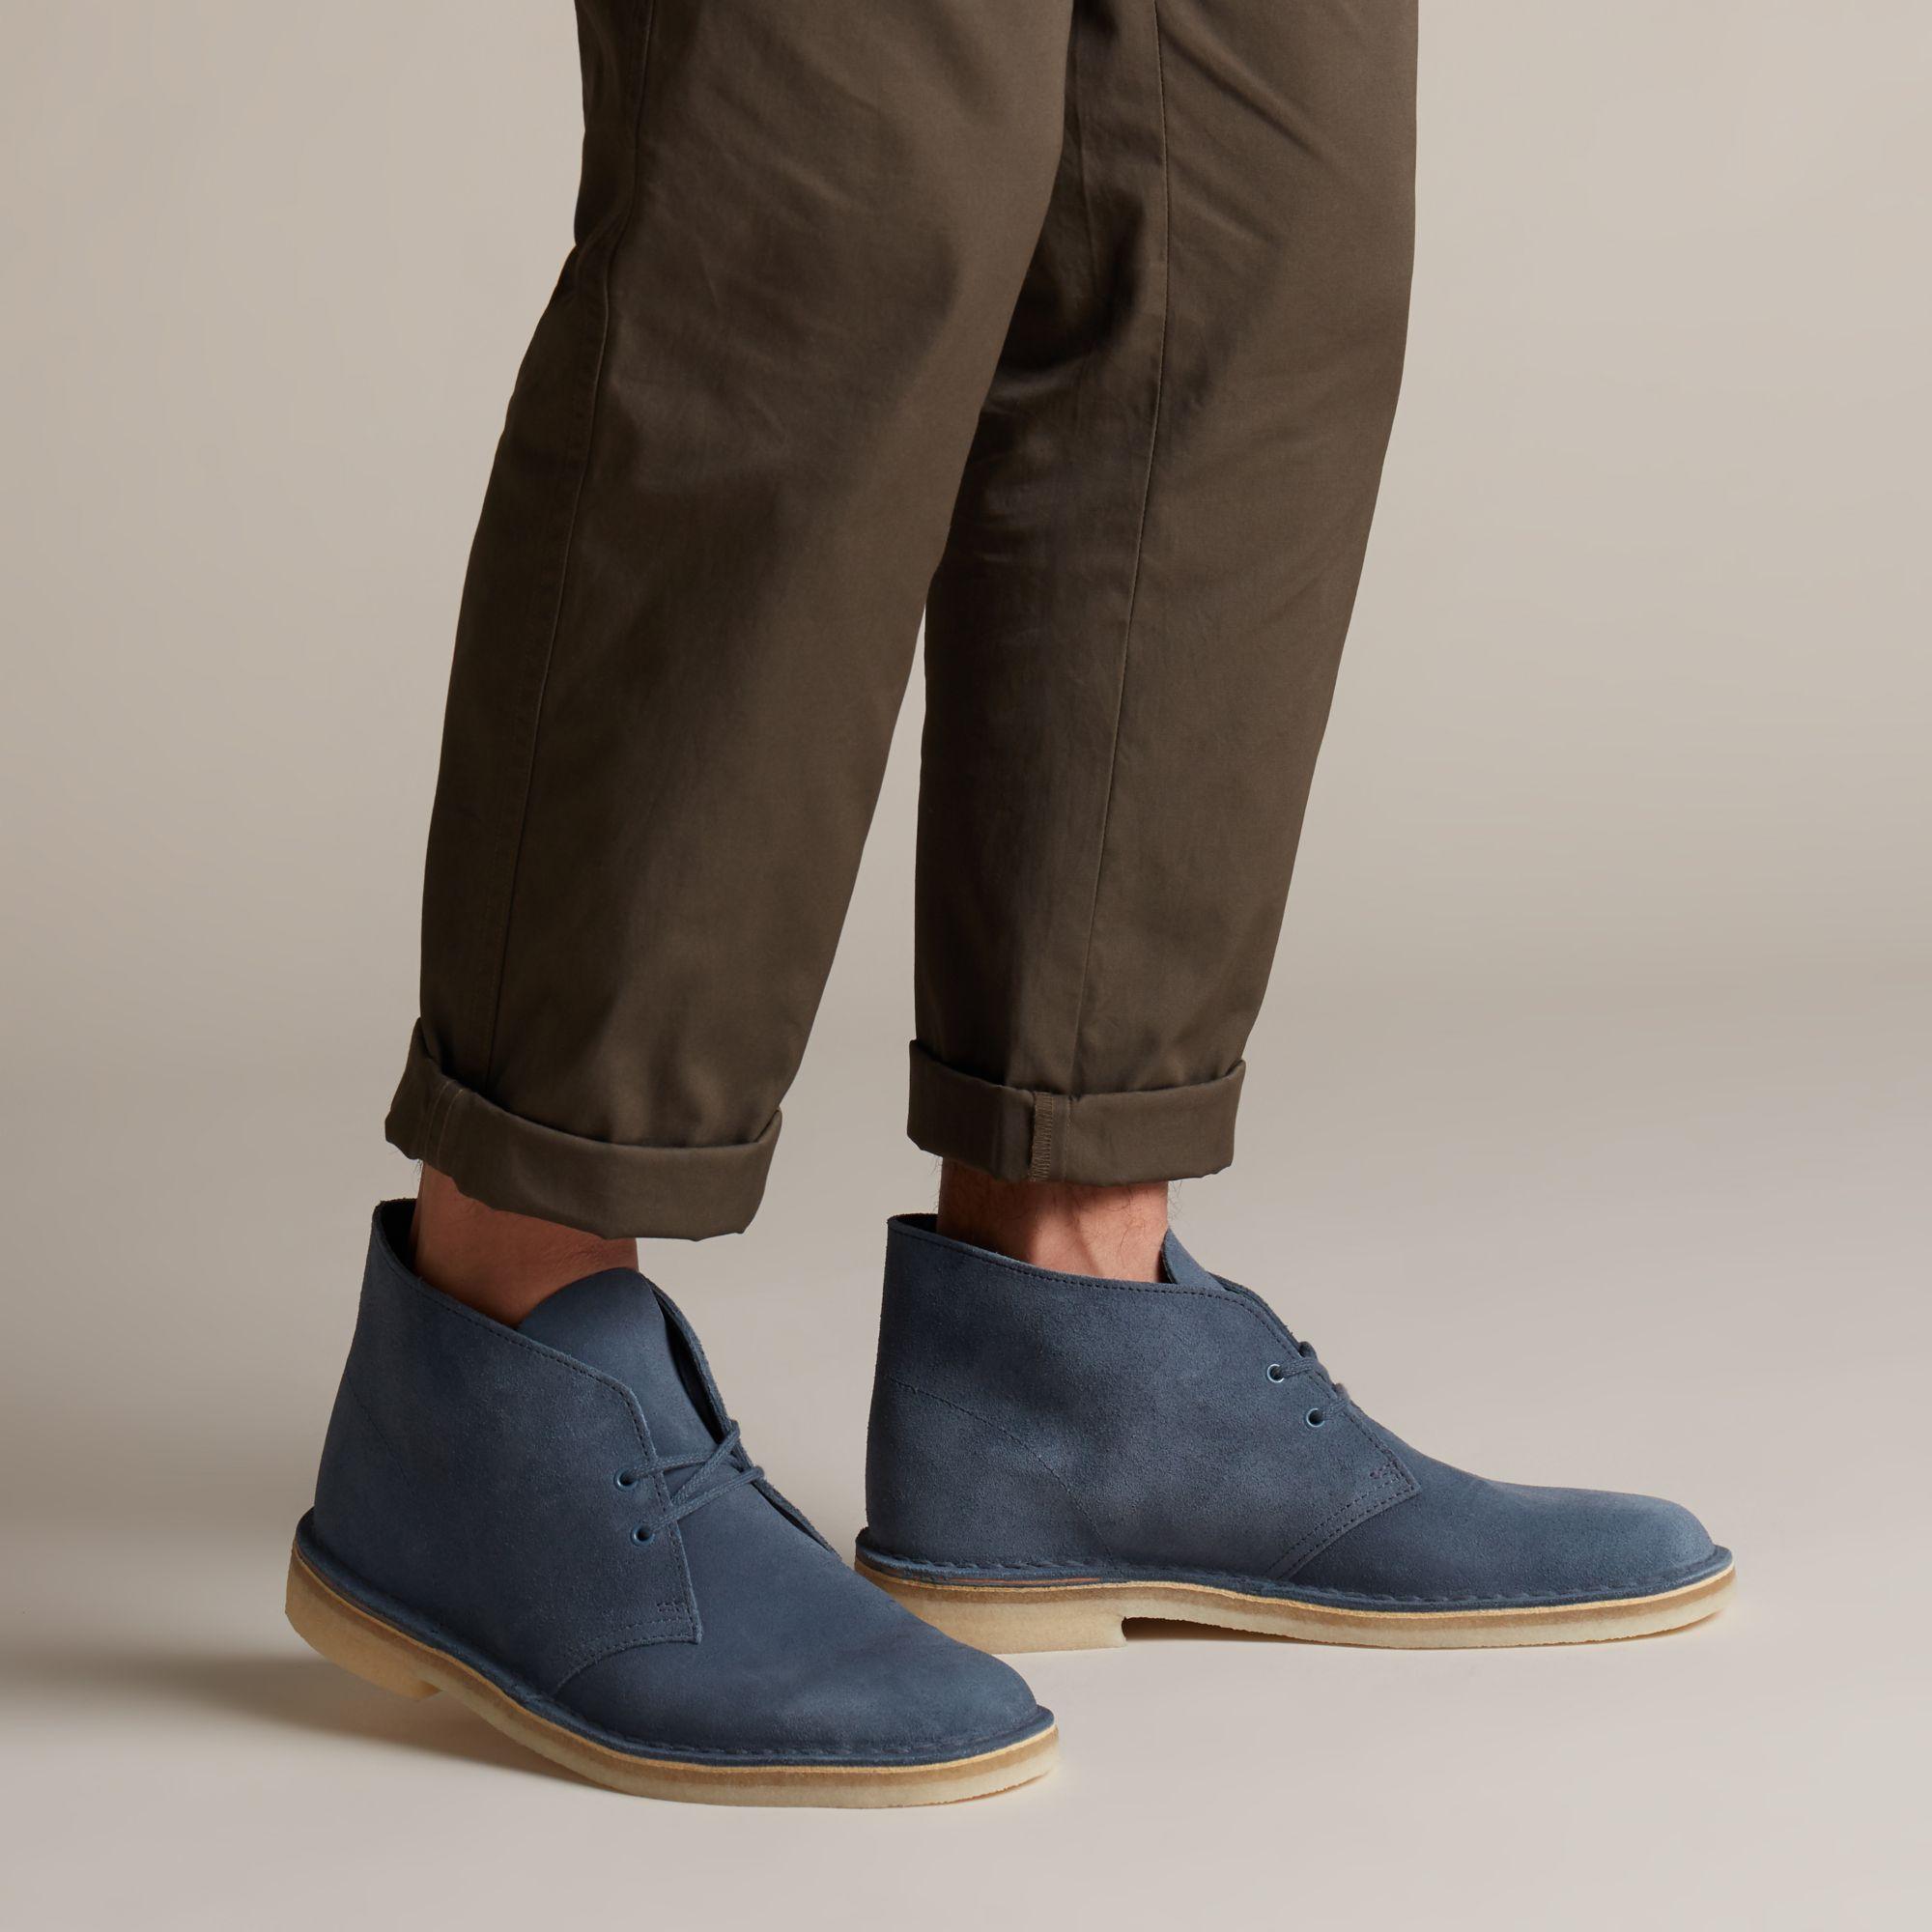 clarks boots blue